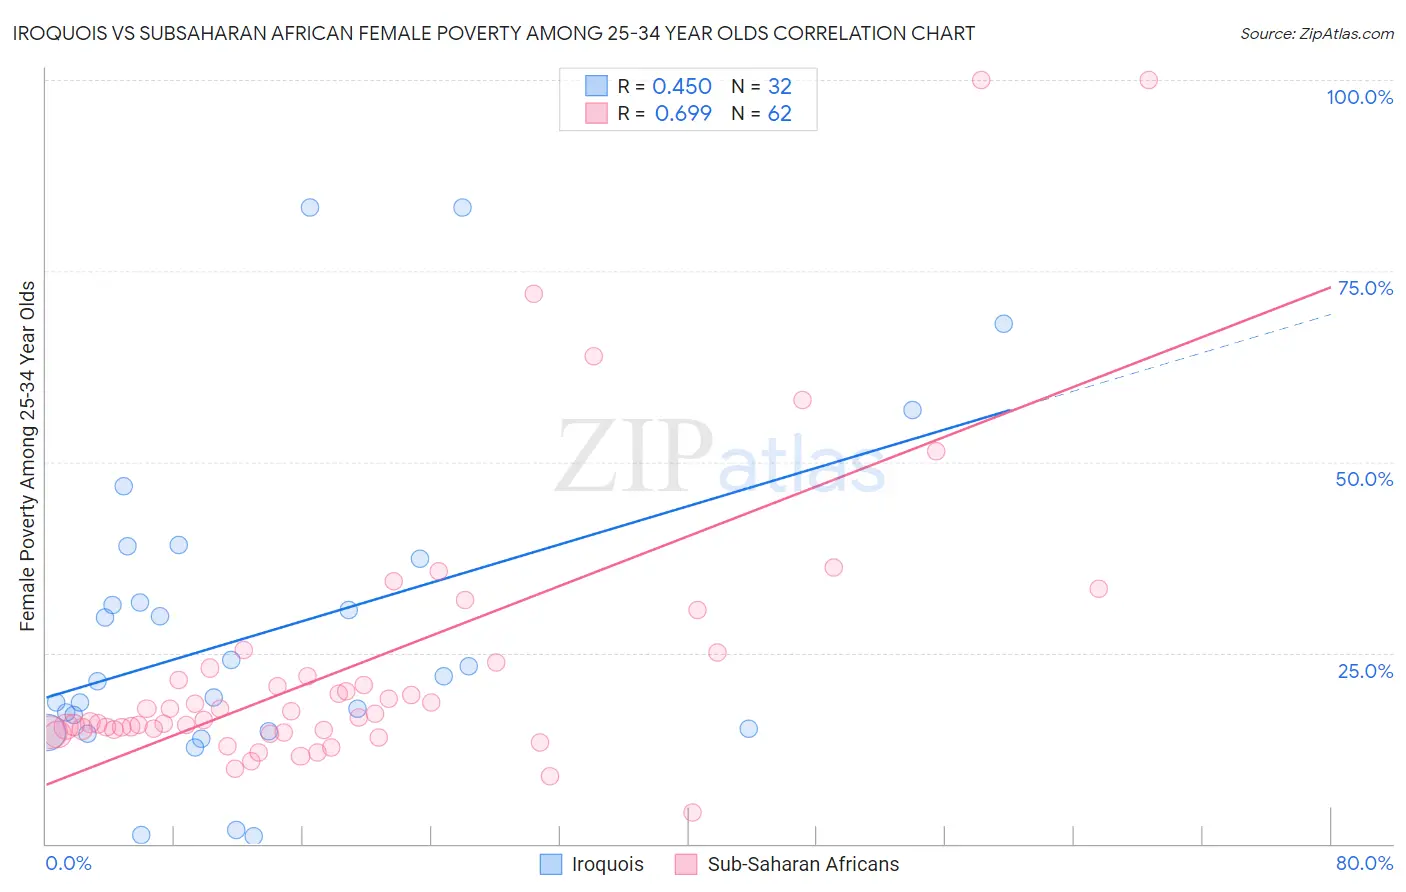 Iroquois vs Subsaharan African Female Poverty Among 25-34 Year Olds